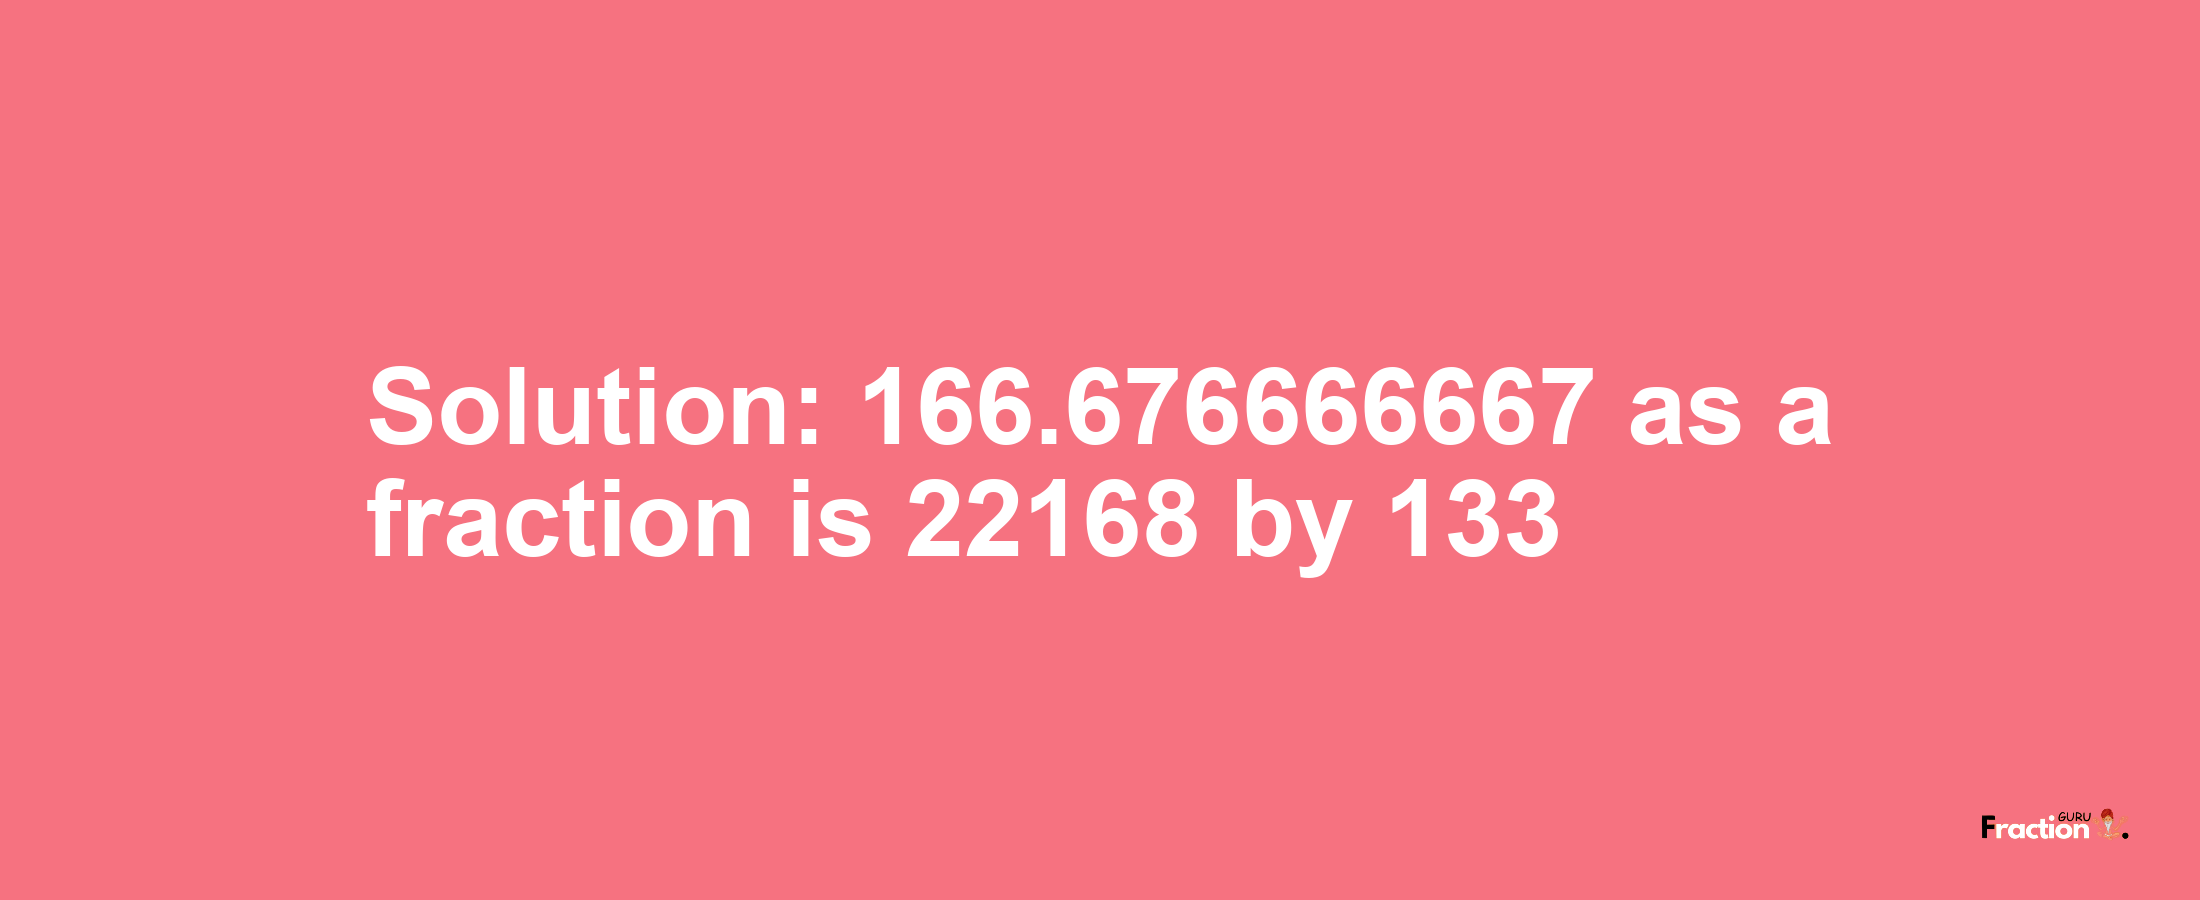 Solution:166.676666667 as a fraction is 22168/133